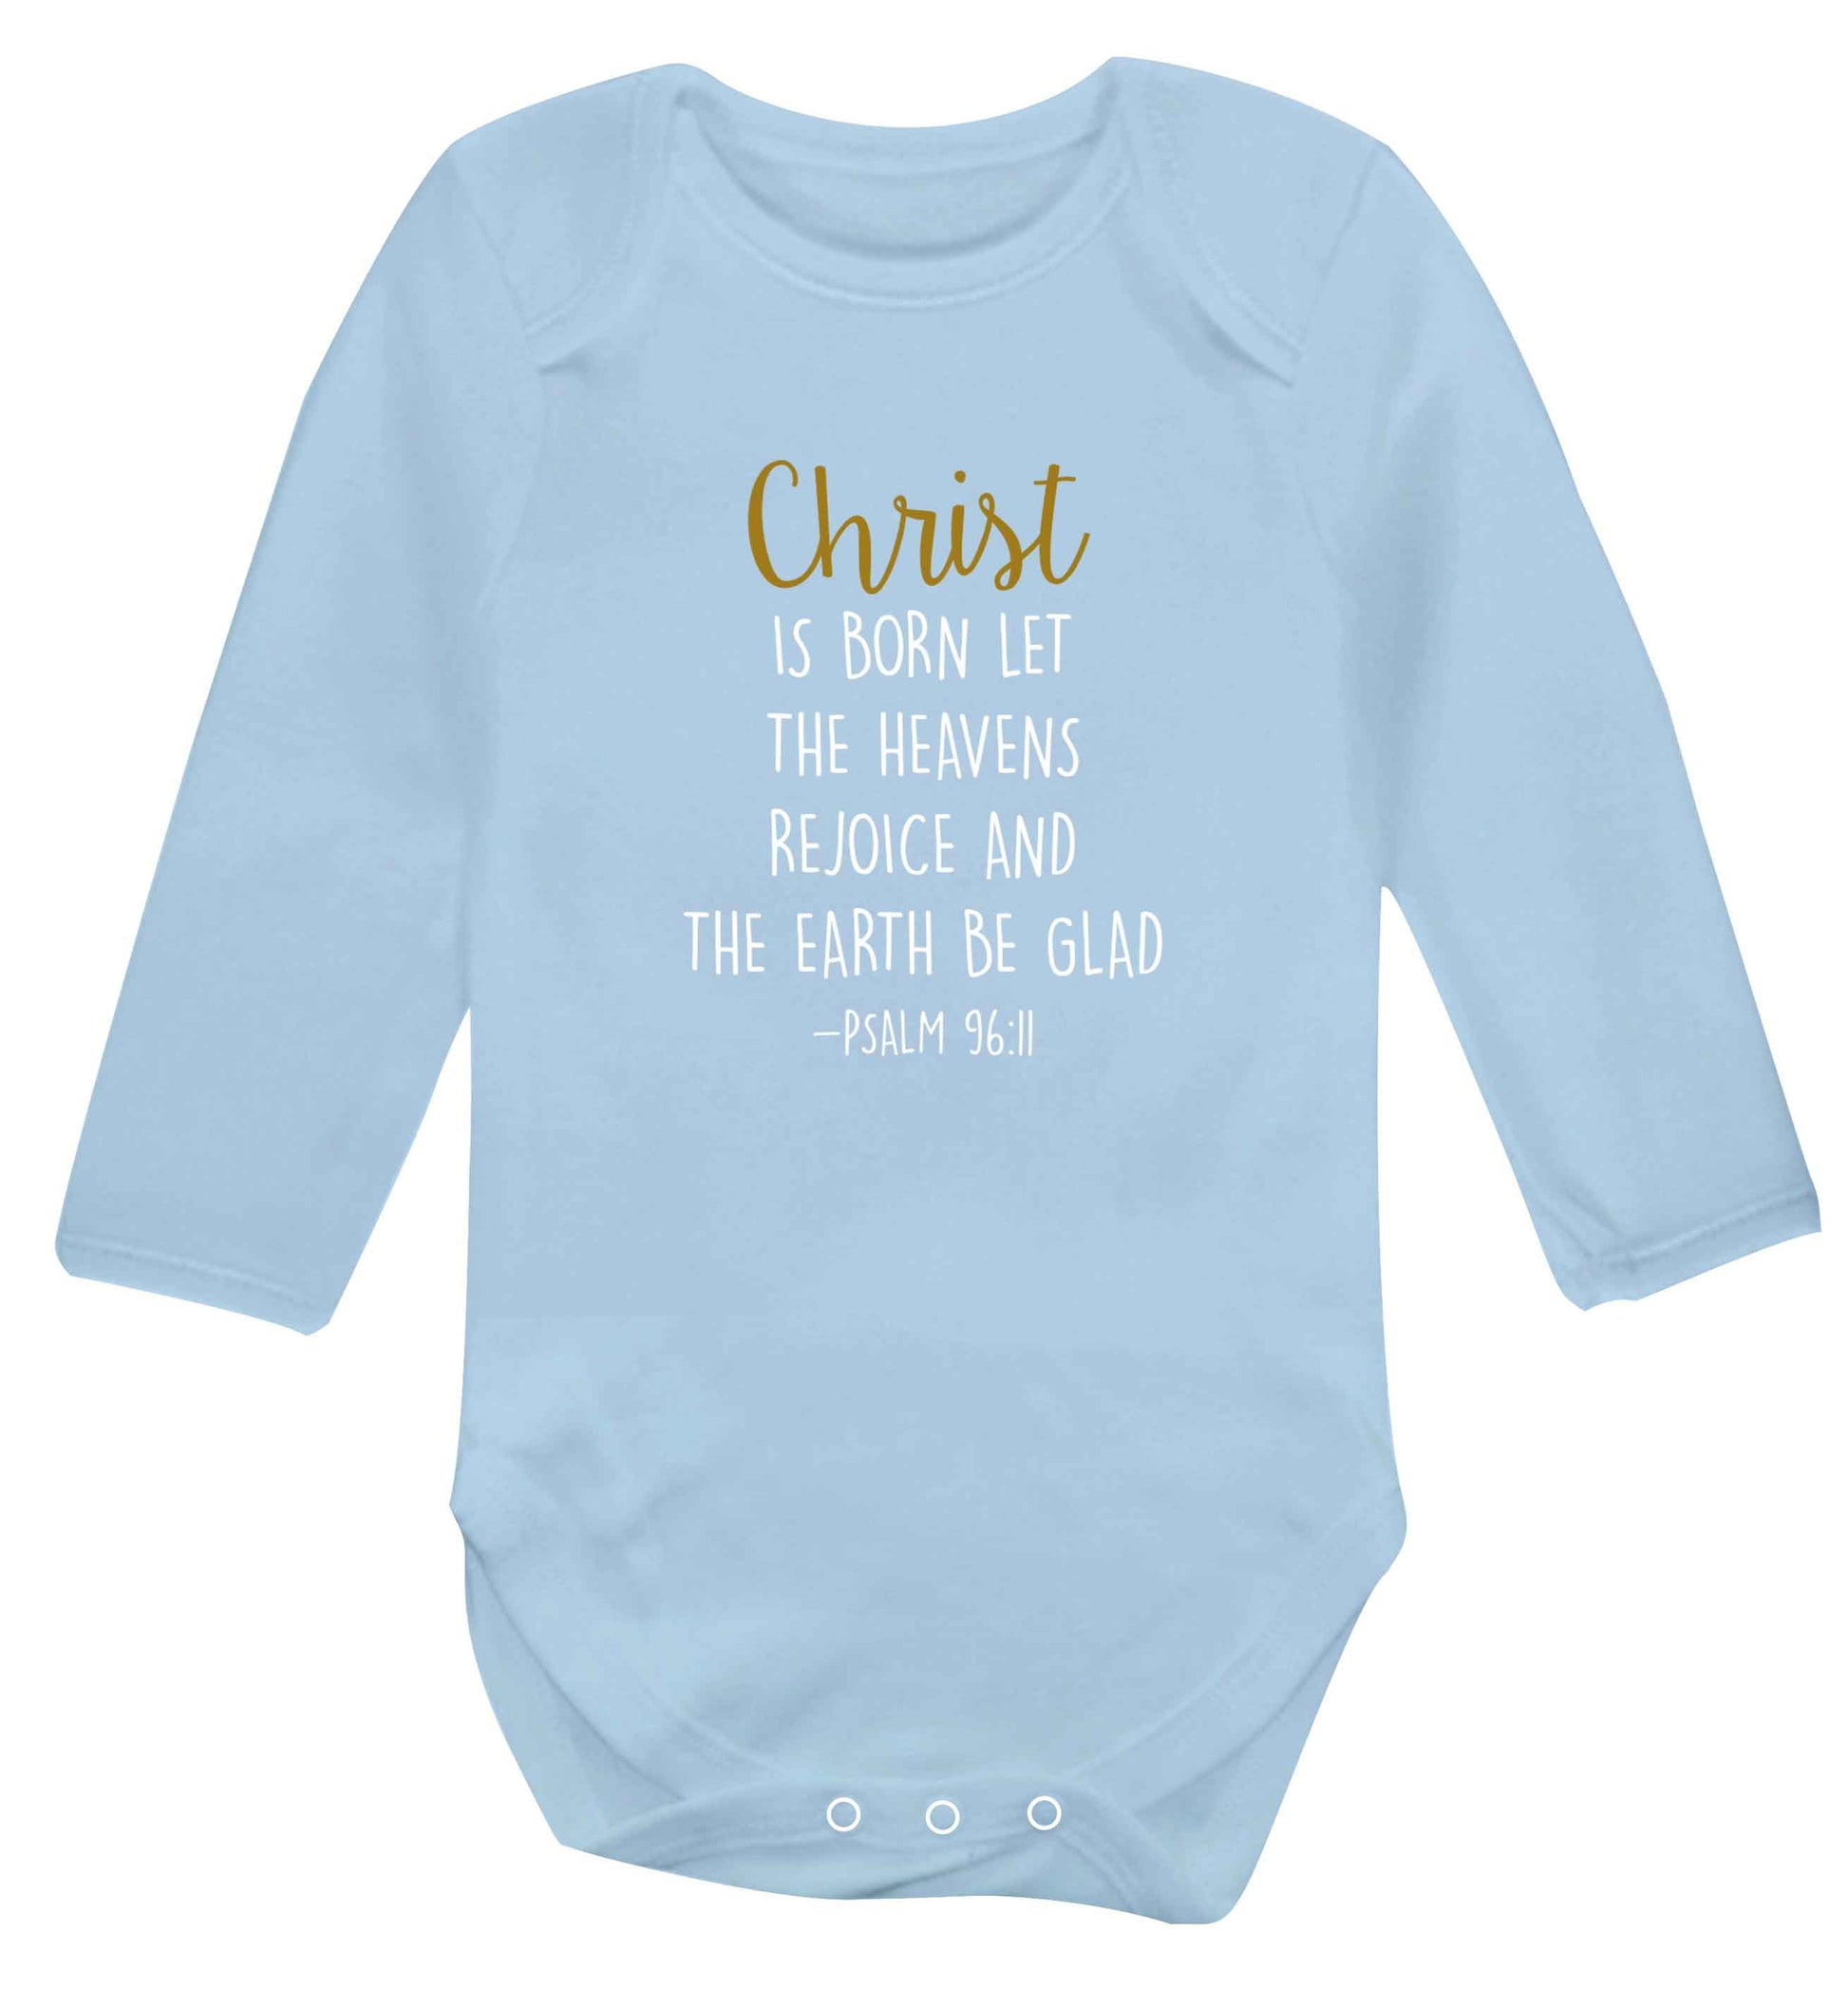 Christ is Born Psalm 96:11 baby vest long sleeved pale blue 6-12 months